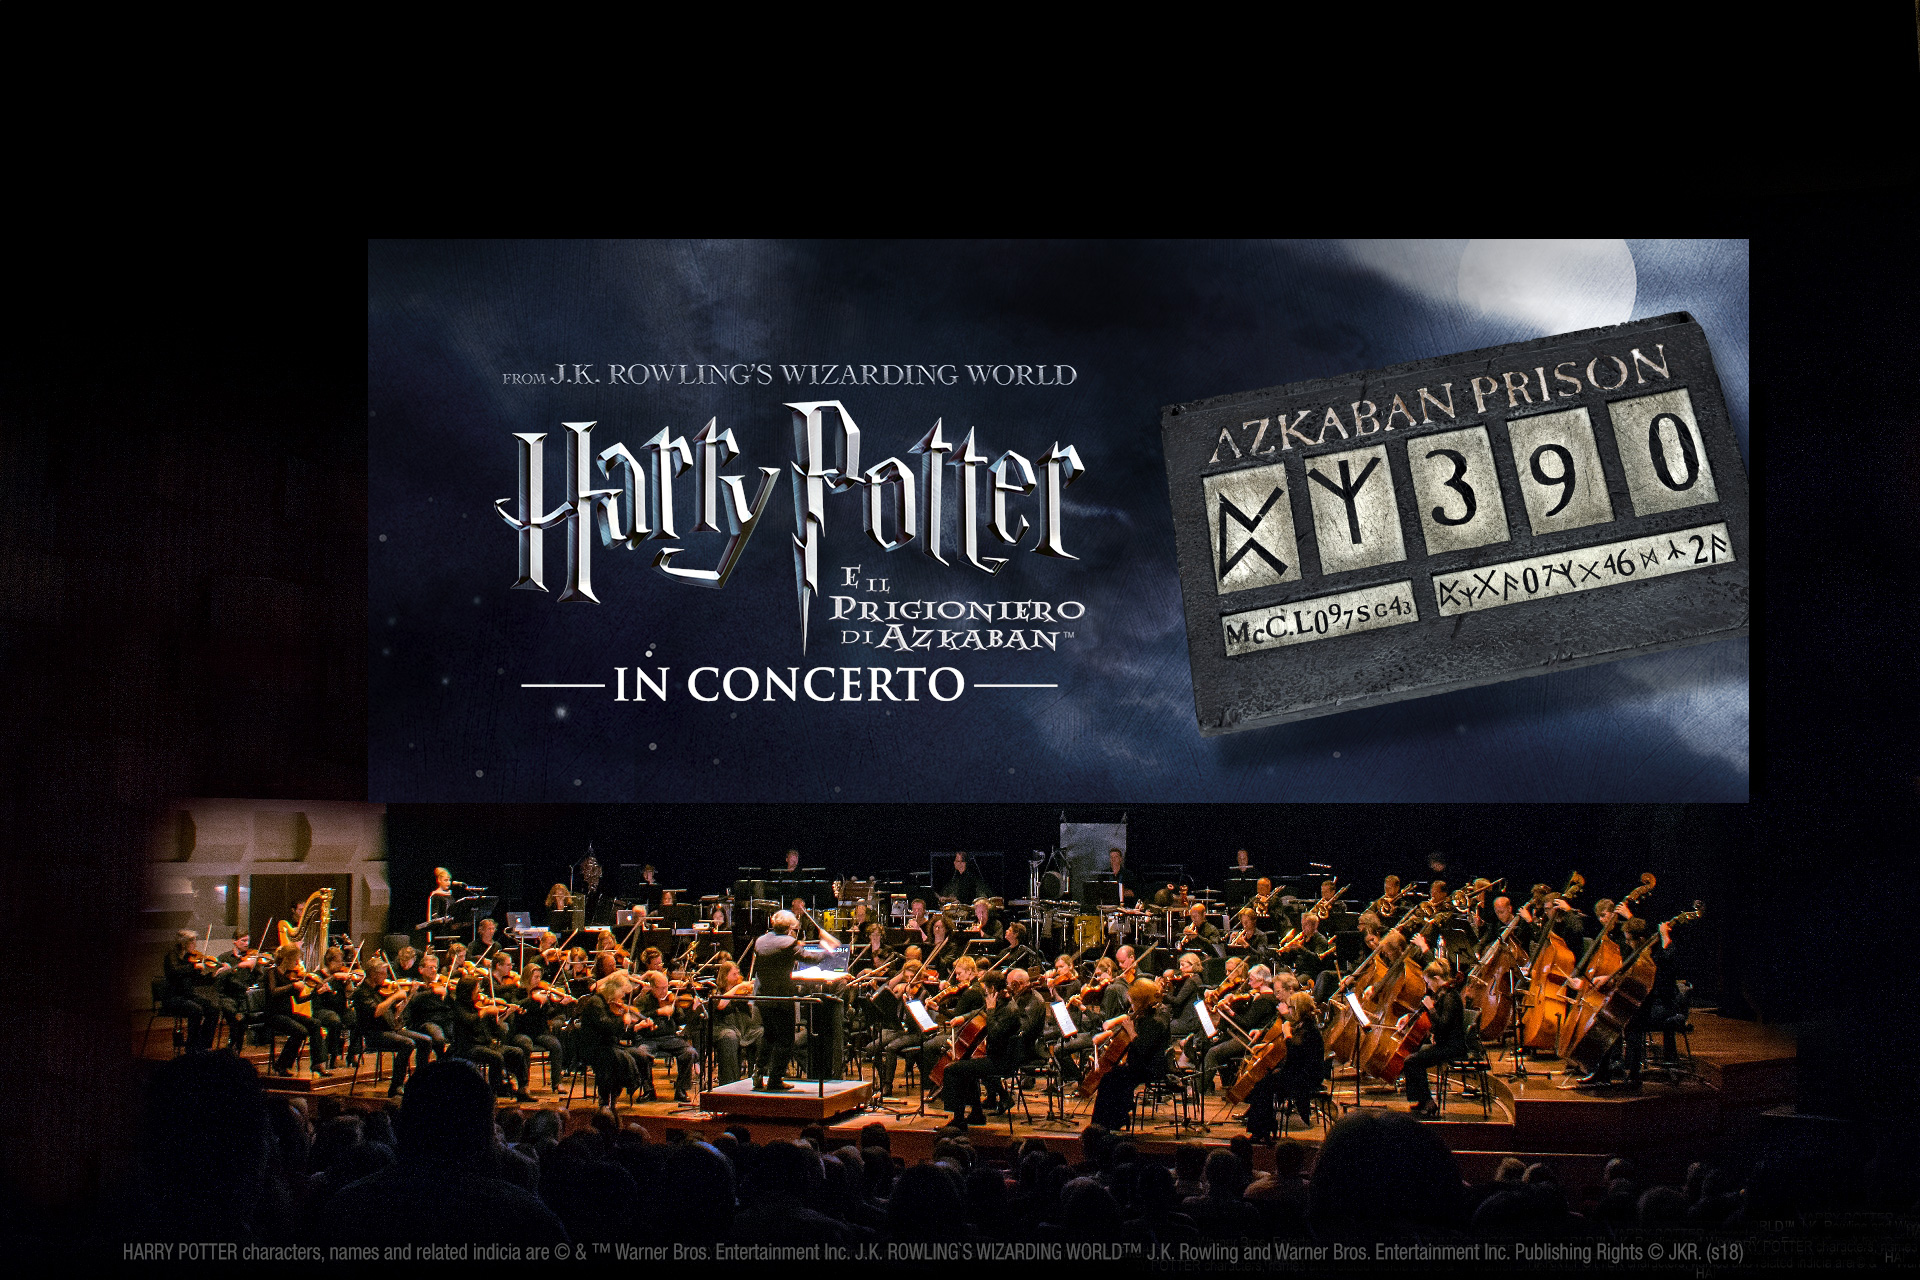 Harry Potter in concerto